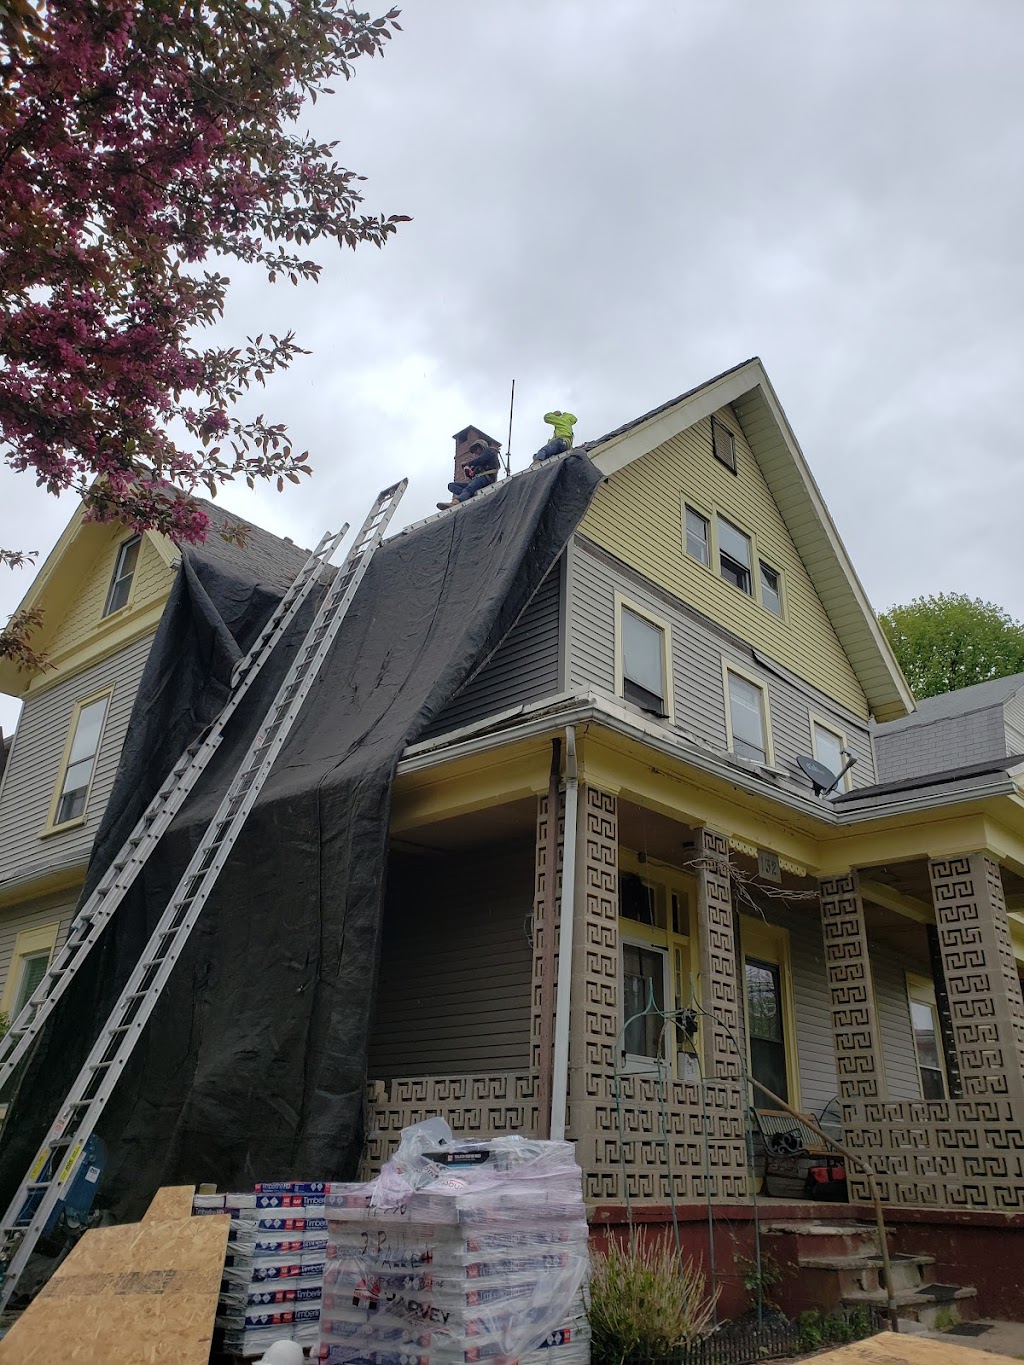 Cachis roofing, llc | 18 Waterville St, Waterbury, CT 06710 | Phone: (203) 706-8929